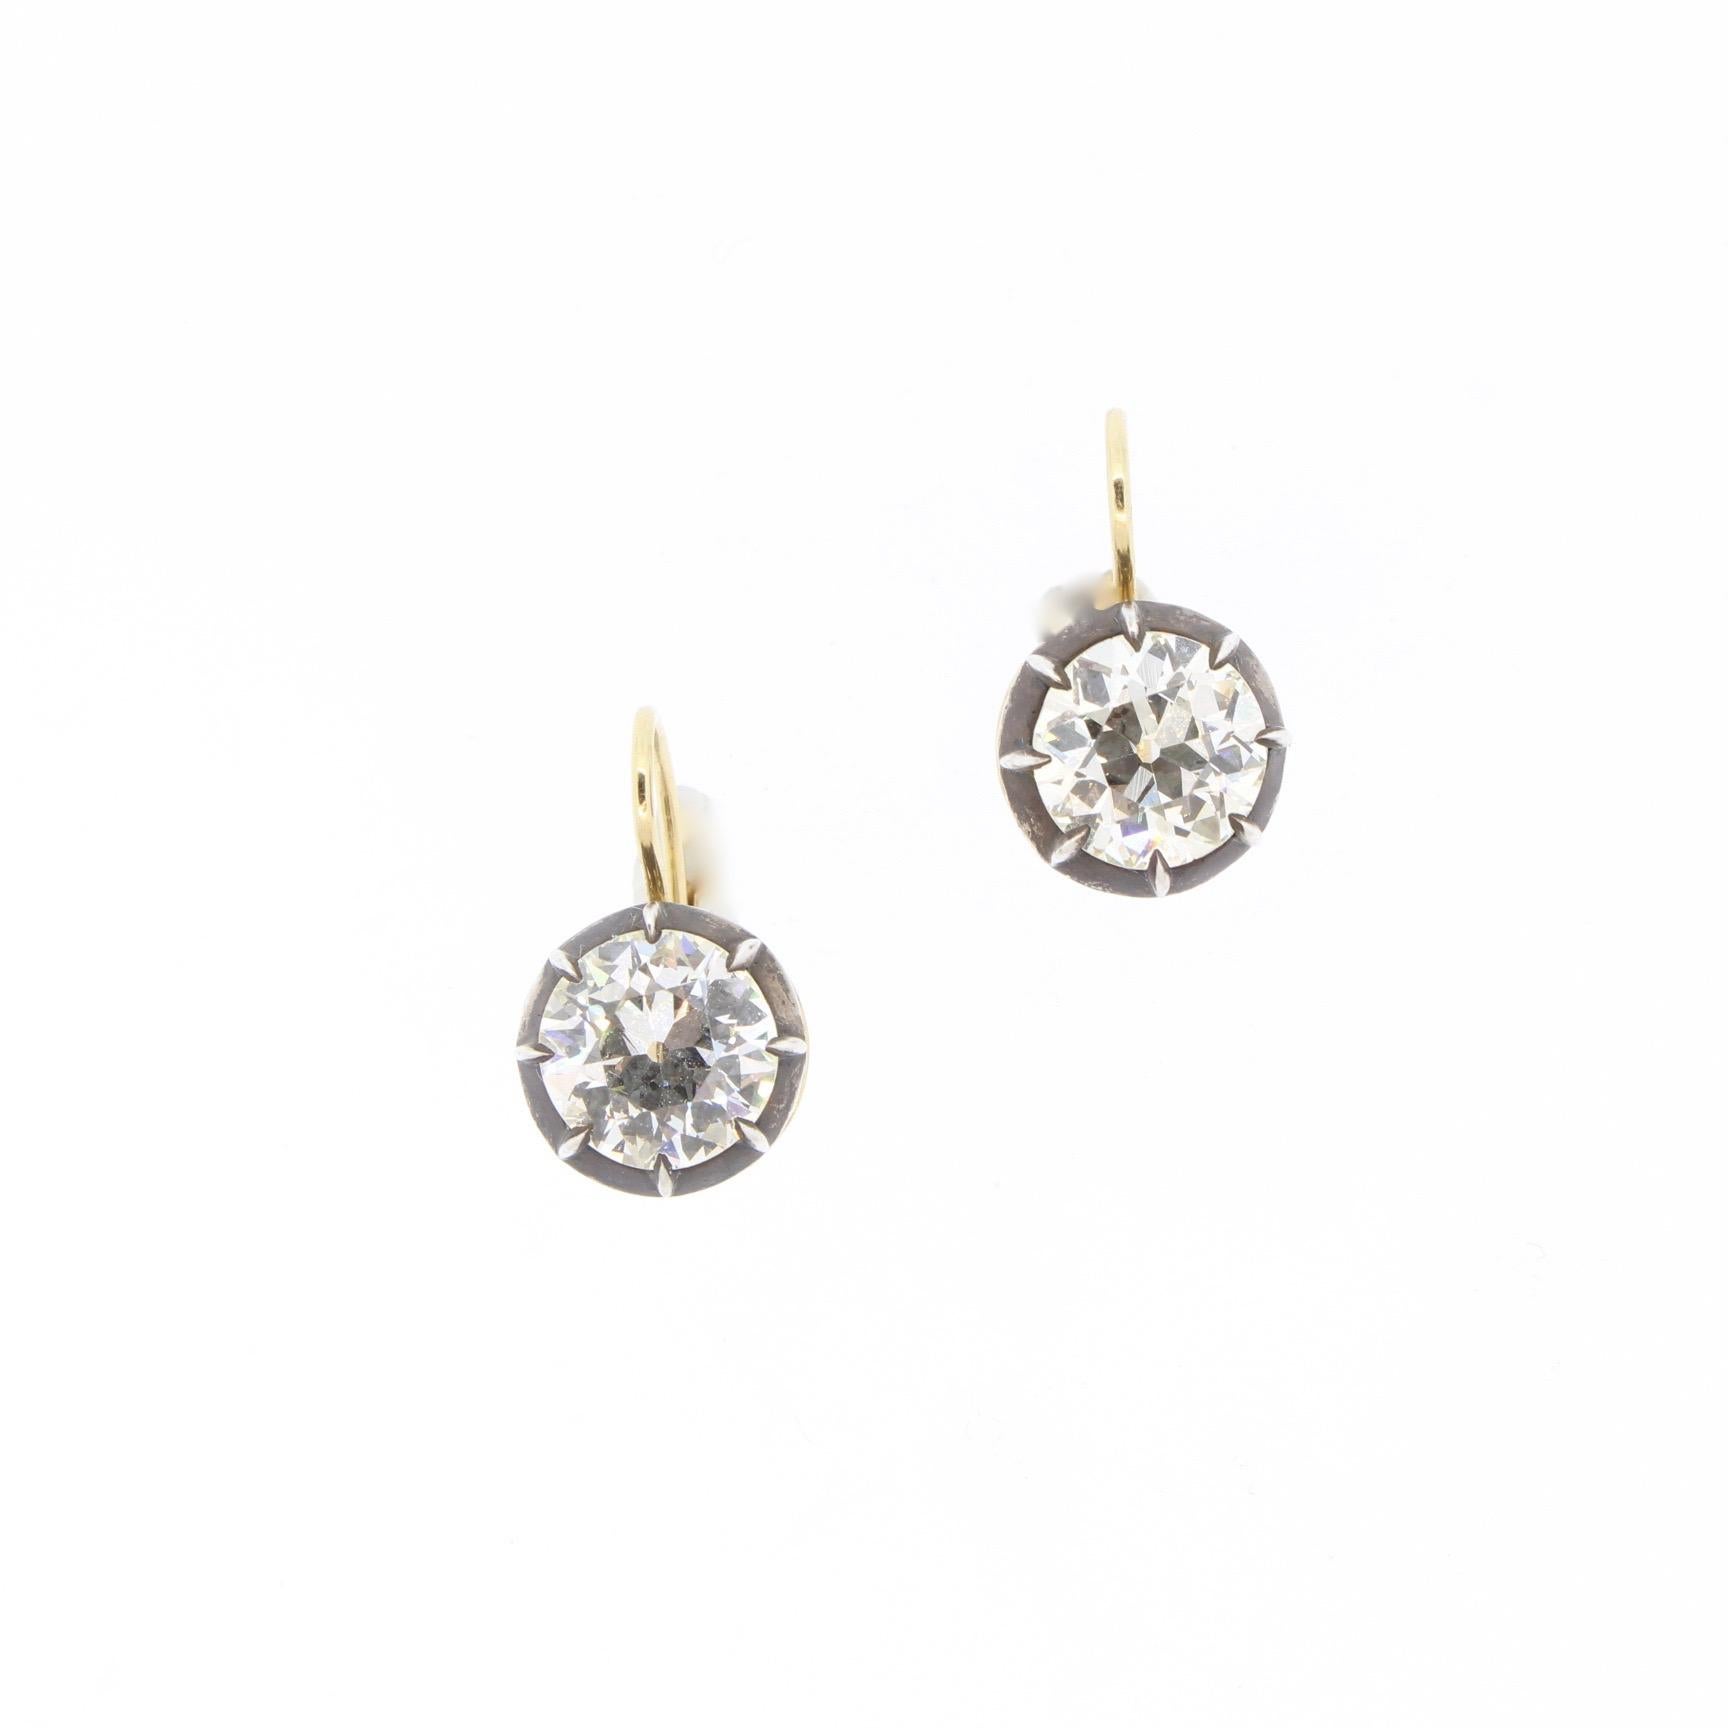 Late Victorian 2.46 and 2.55 Carat Antique Style Old European Cut Diamond Drop Earrings